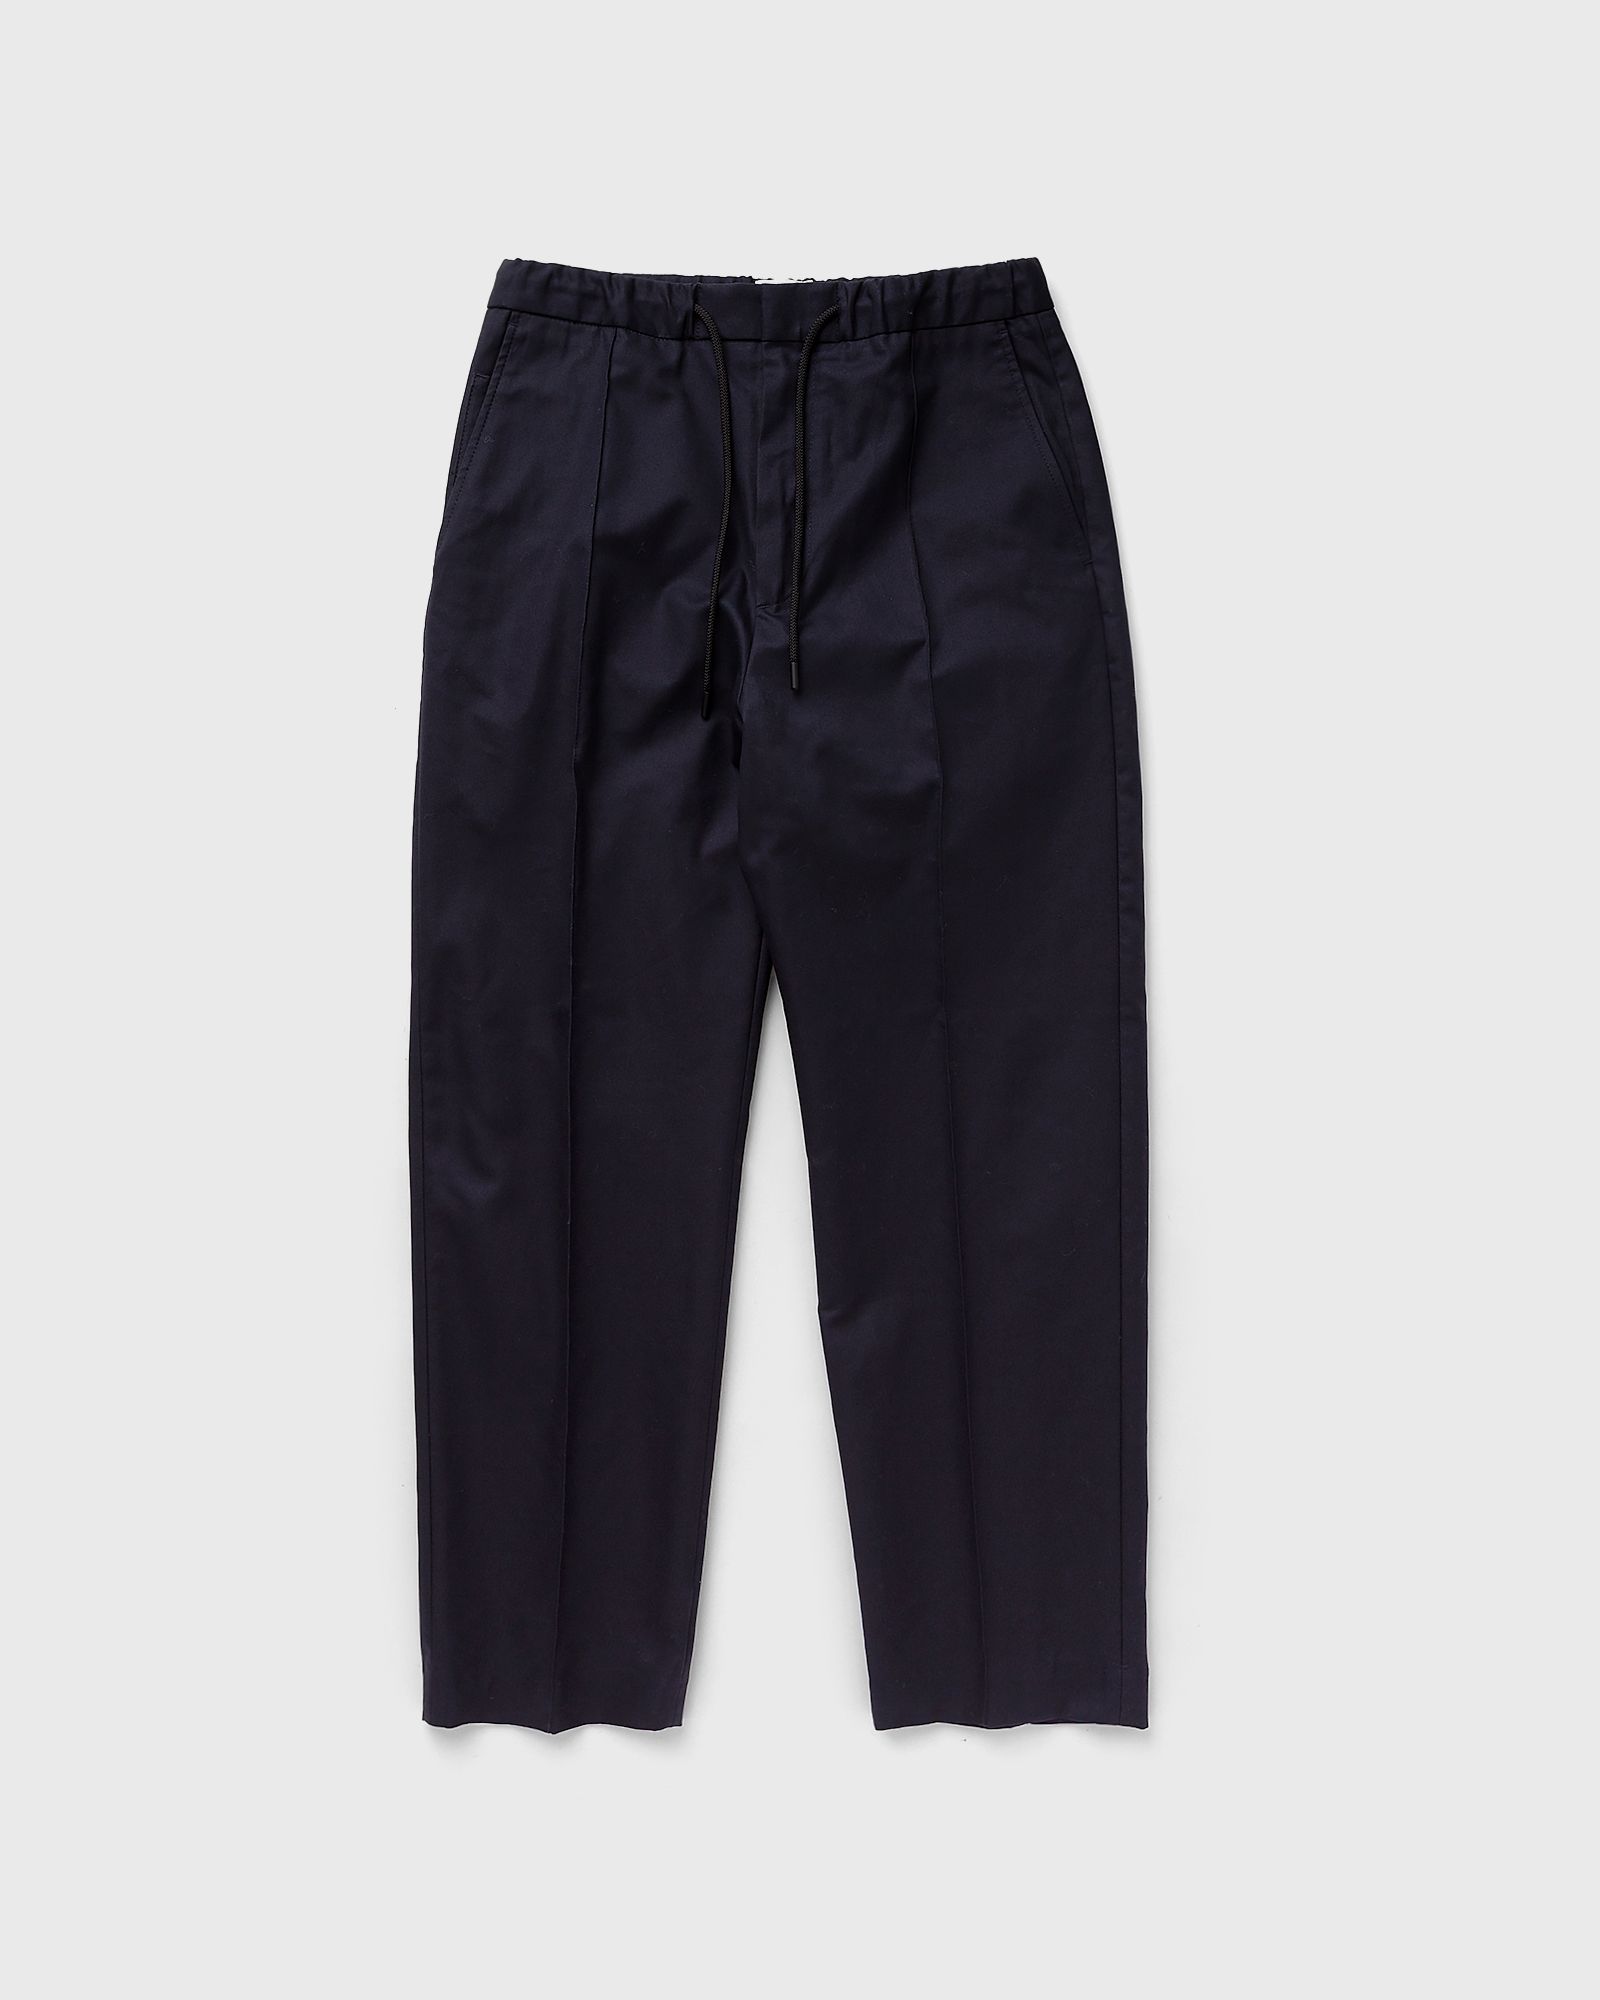 CLOSED - nanaimo straight men casual pants blue in größe:xxl